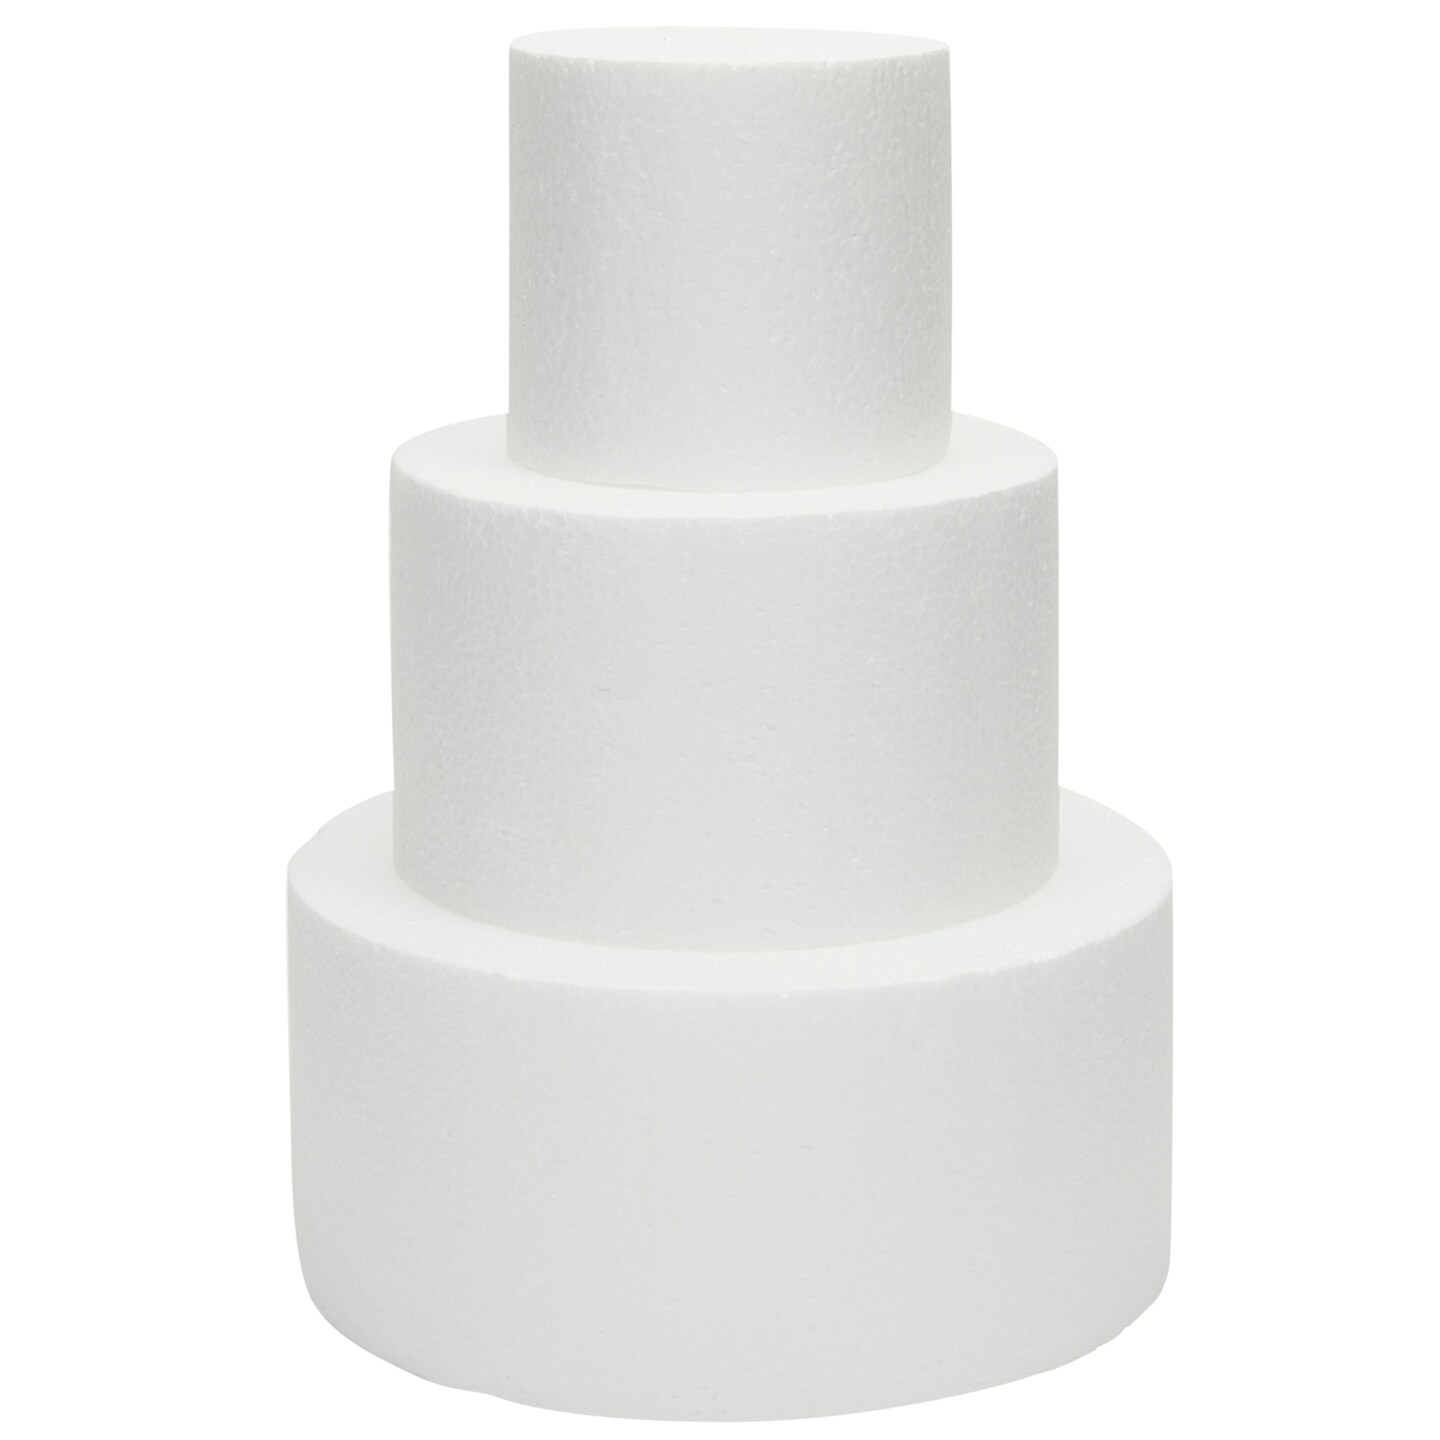 Round Foam Cake Dummy Cakes for Decorating For Wedding Cakes Display Cakes  Party